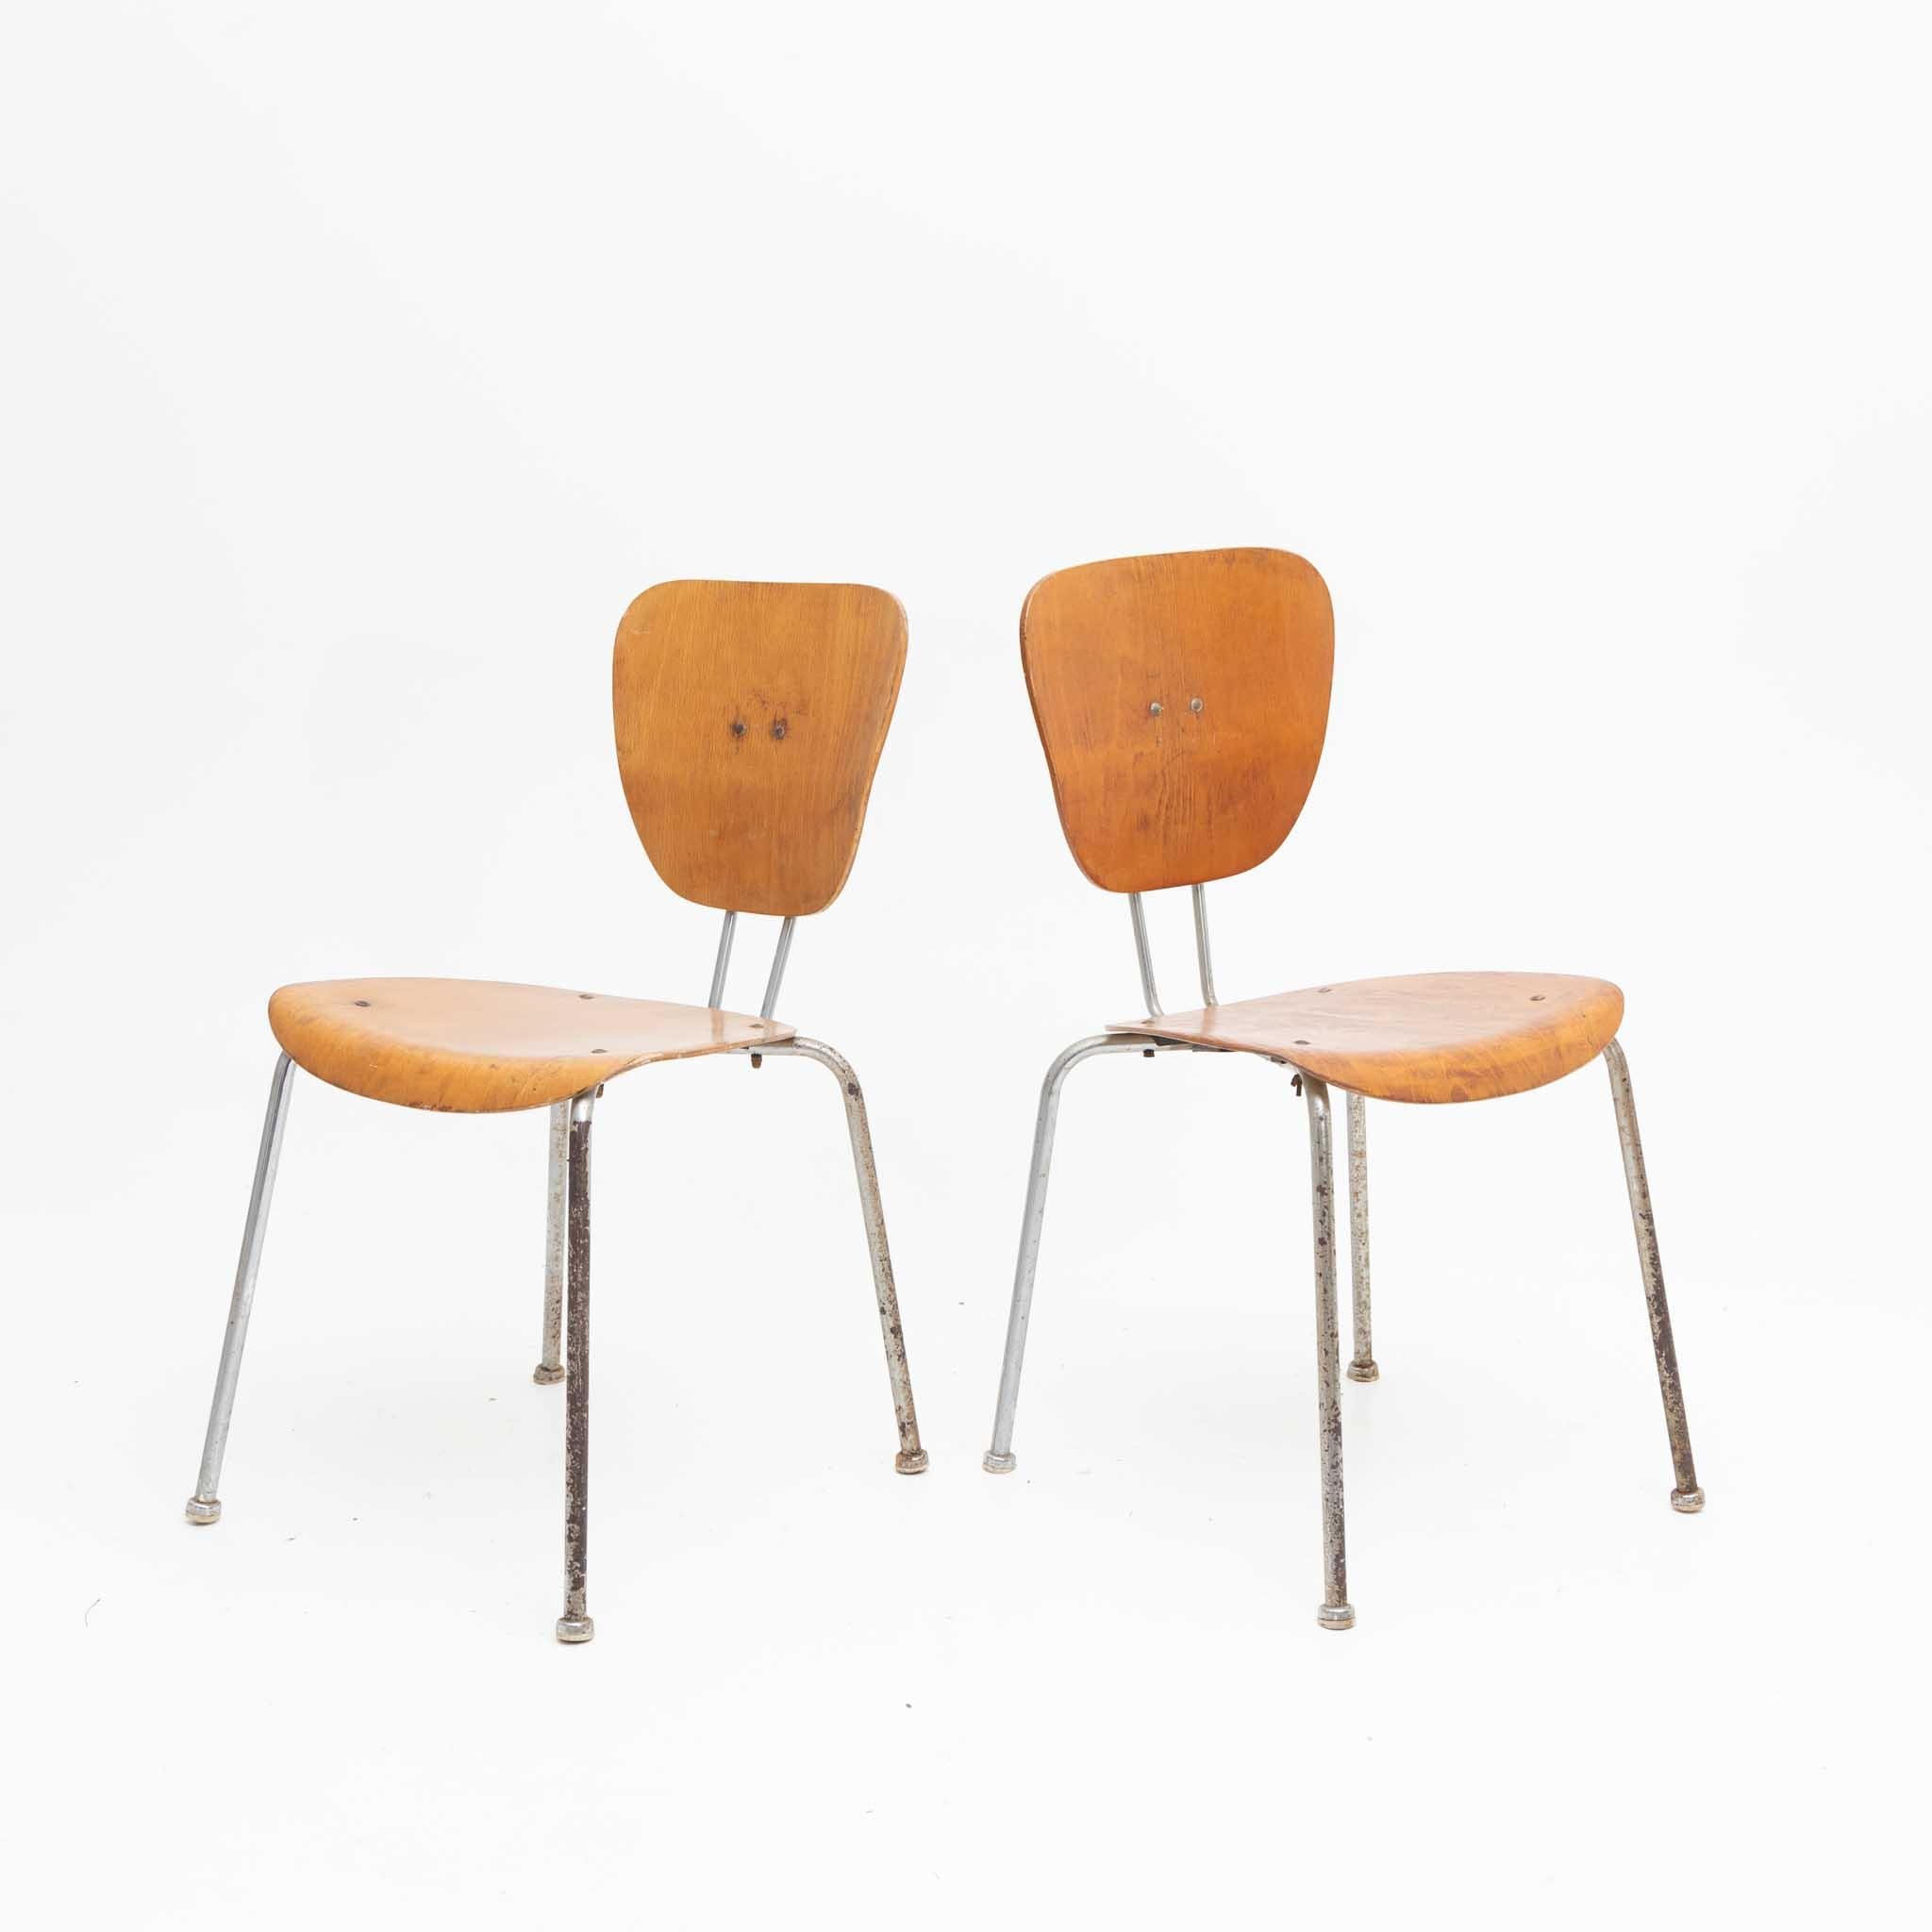 Mid-Century Modern Chairs in the Style of Egon Eiermann, probably Mid-20th Century For Sale